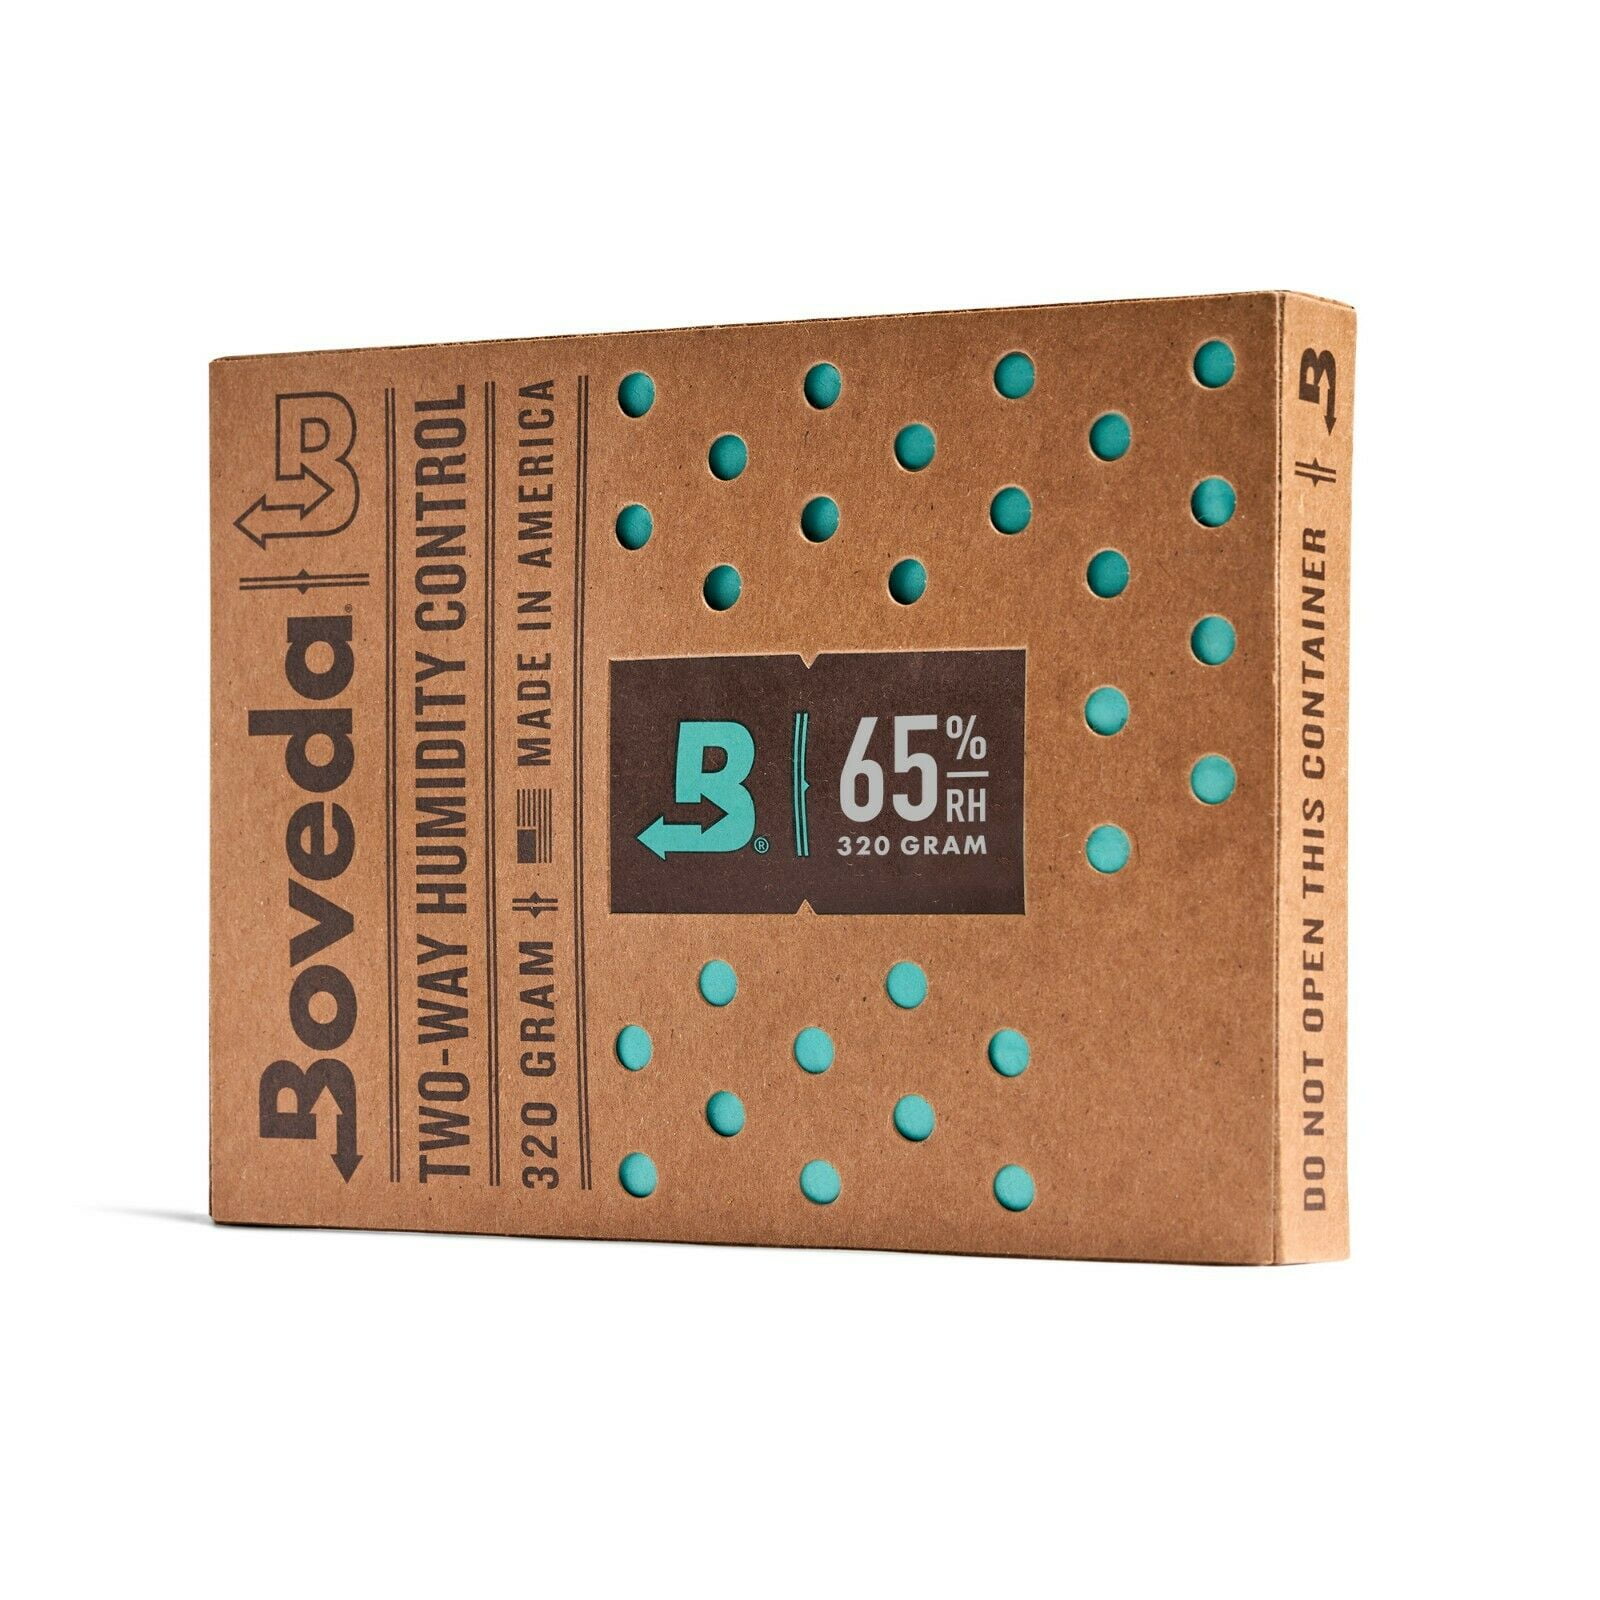 Large 60 gram Size FREE DELIVERY 4 x Boveda 65% RH 2-way Humidity Control 